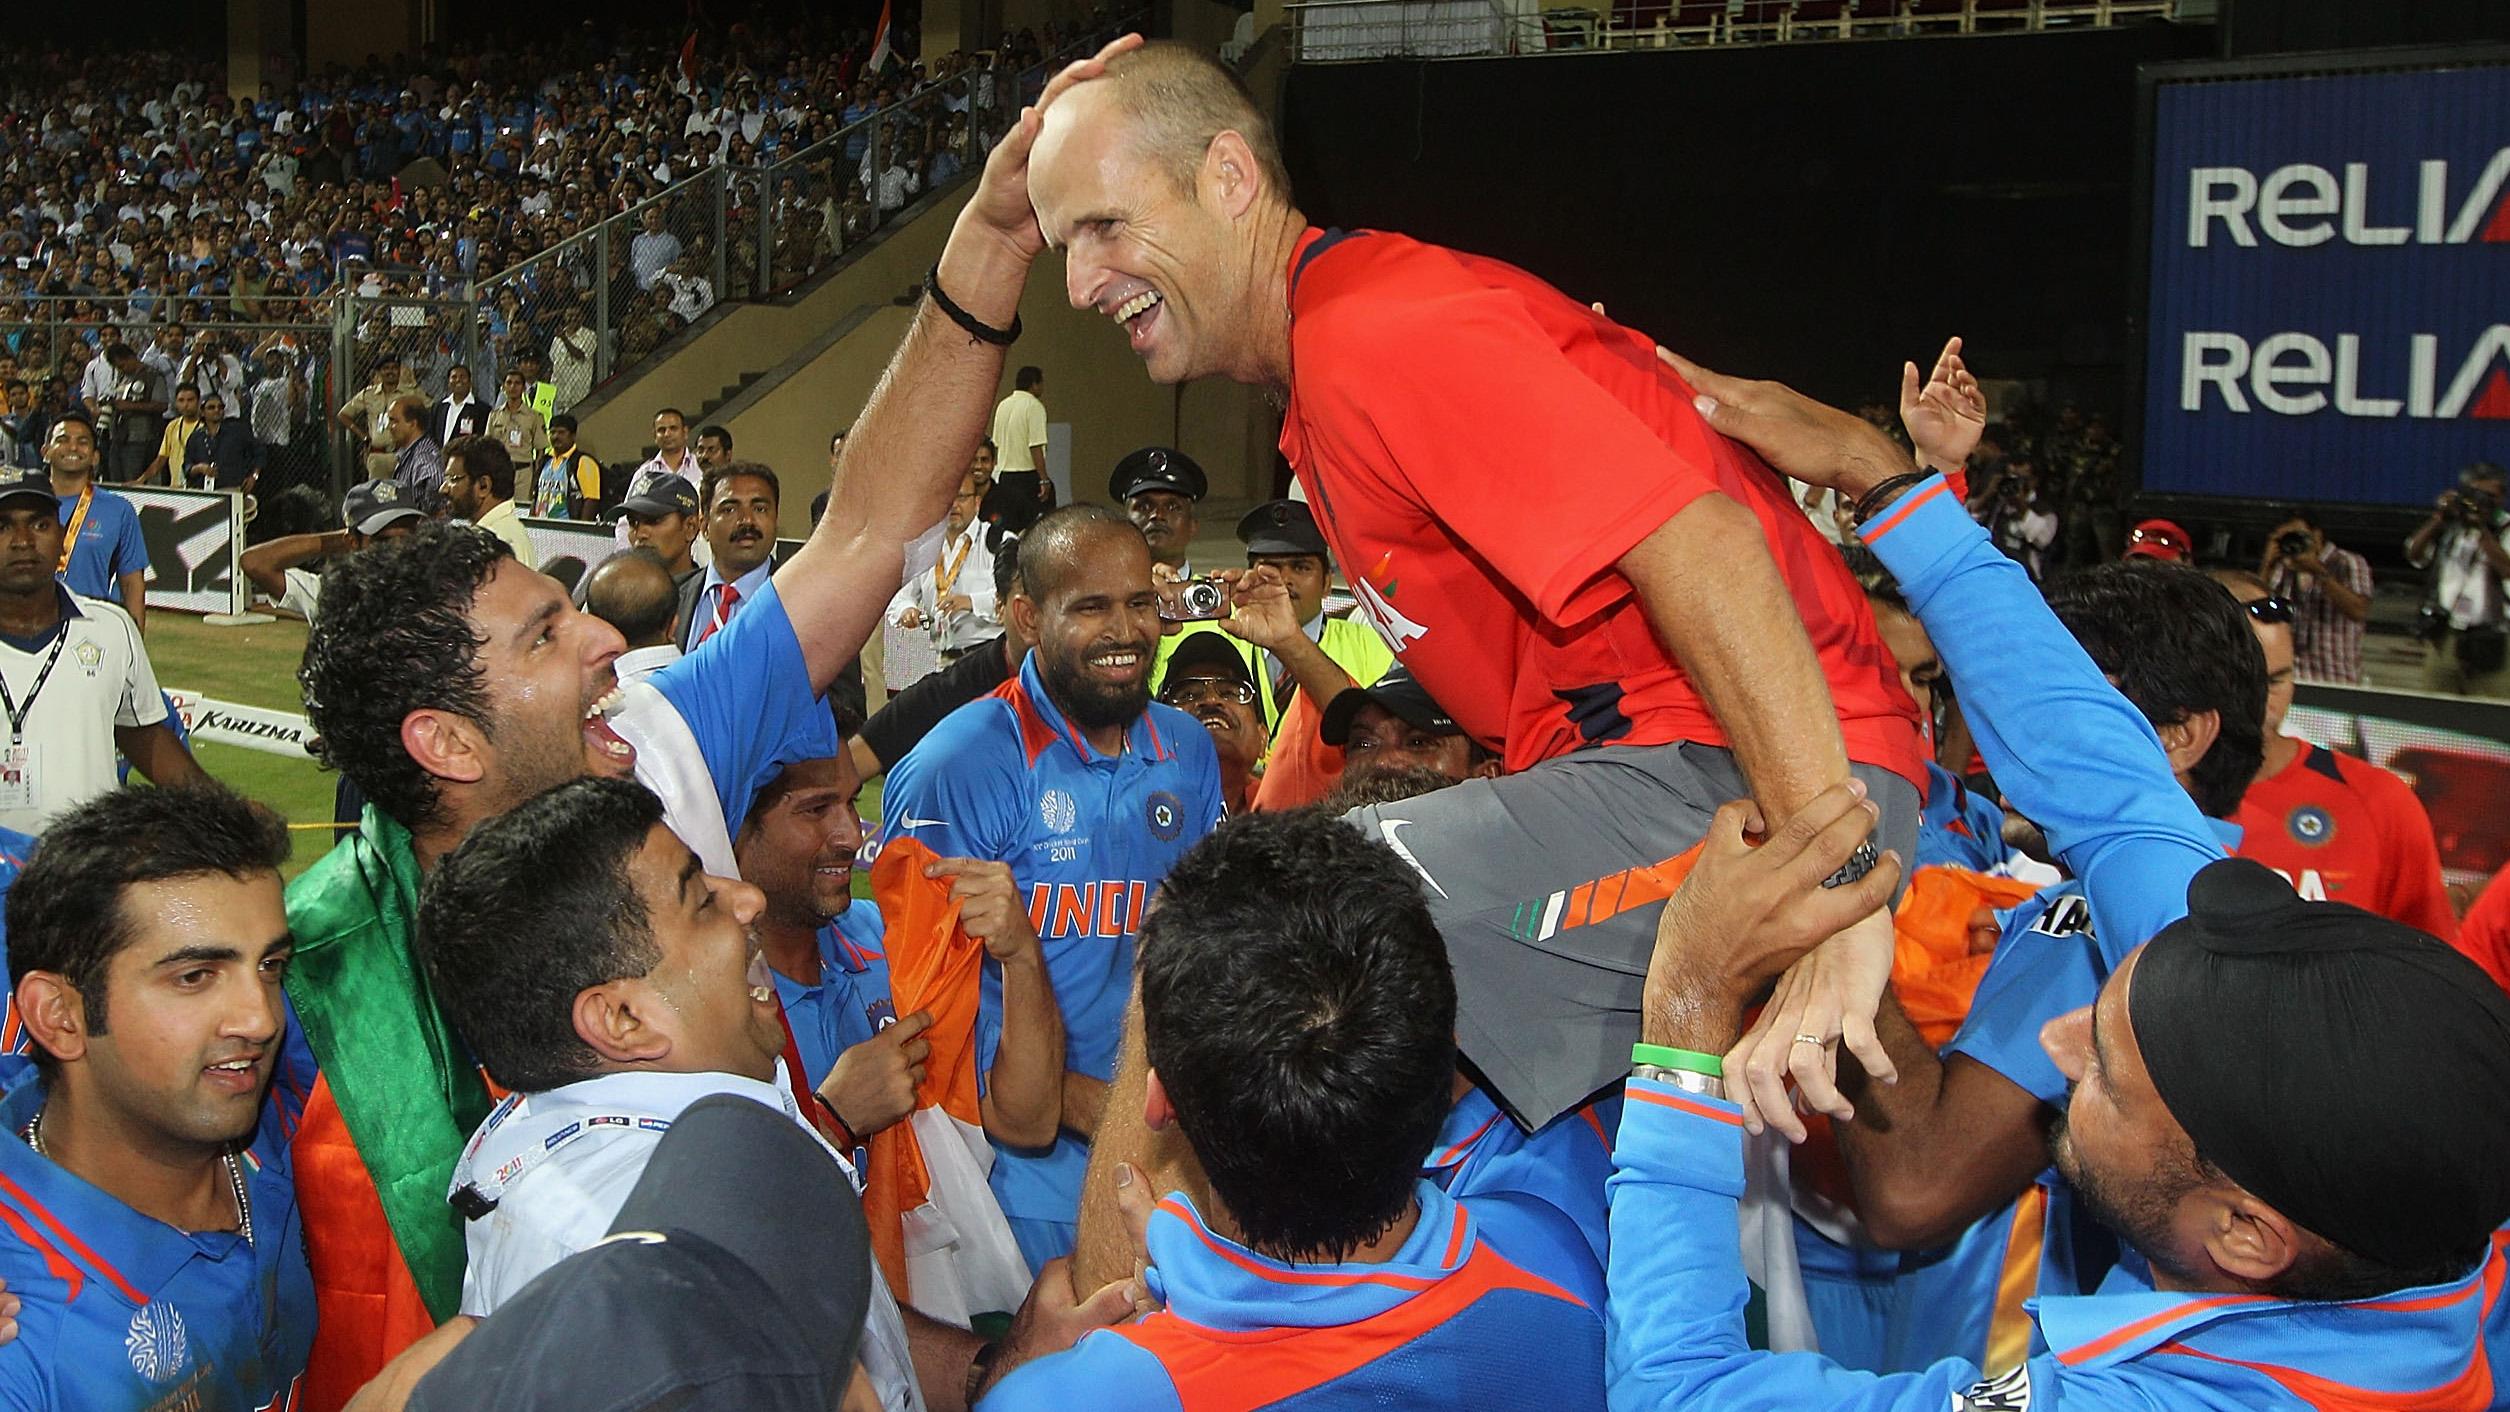 Gary Kirsten among three shortlisted for Indian coaching role